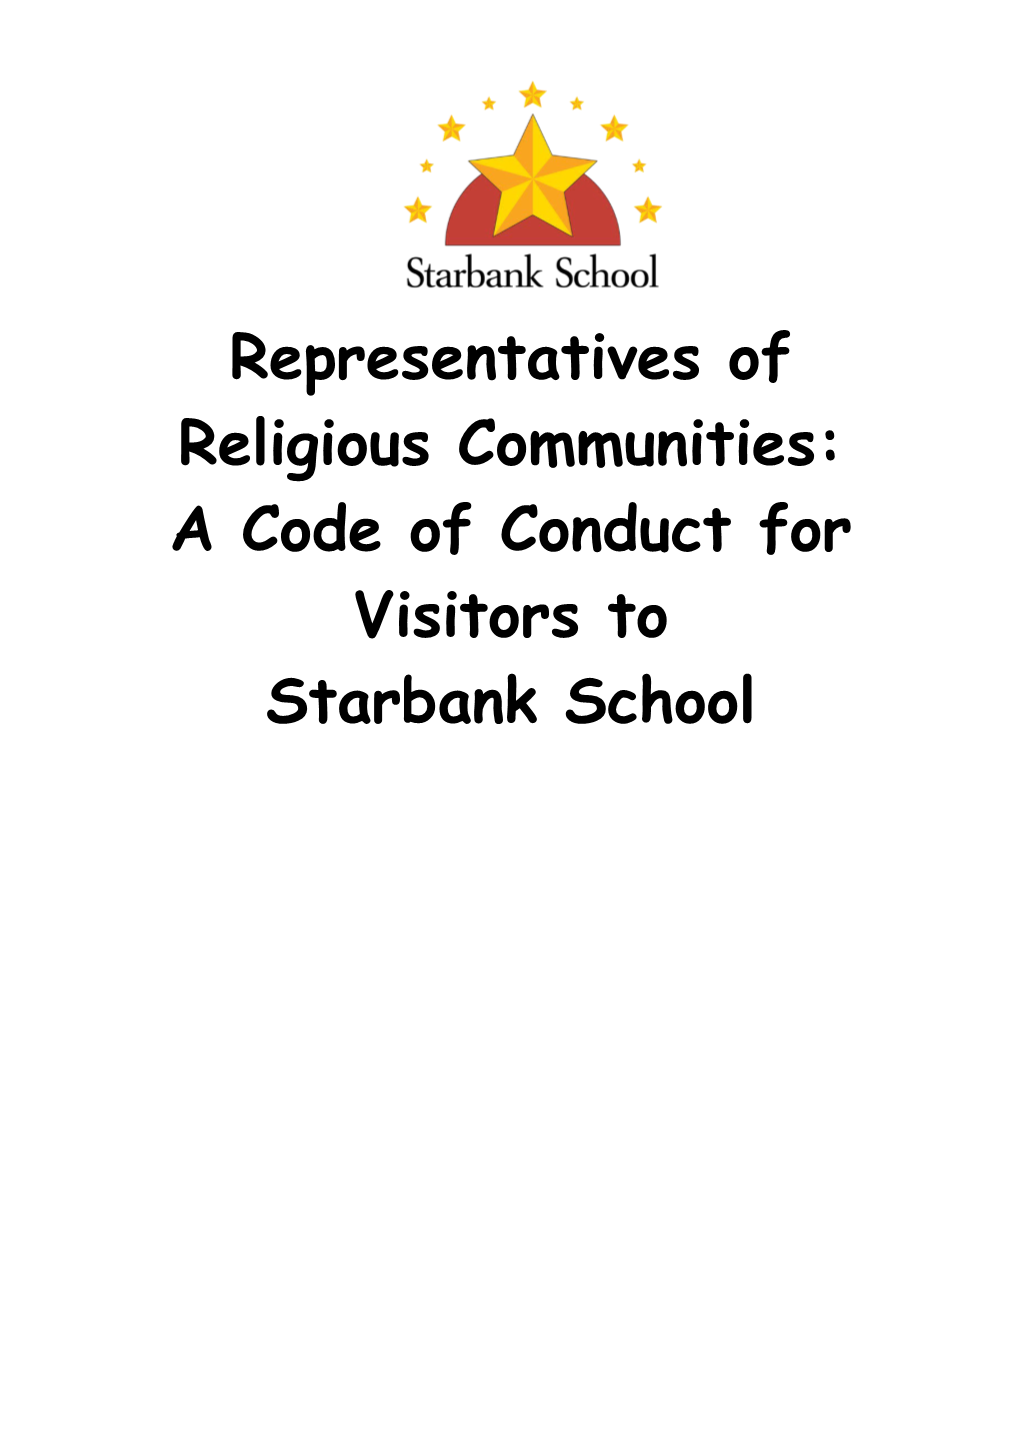 Representatives of Religious Communities: a Code of Conduct for Visitors To